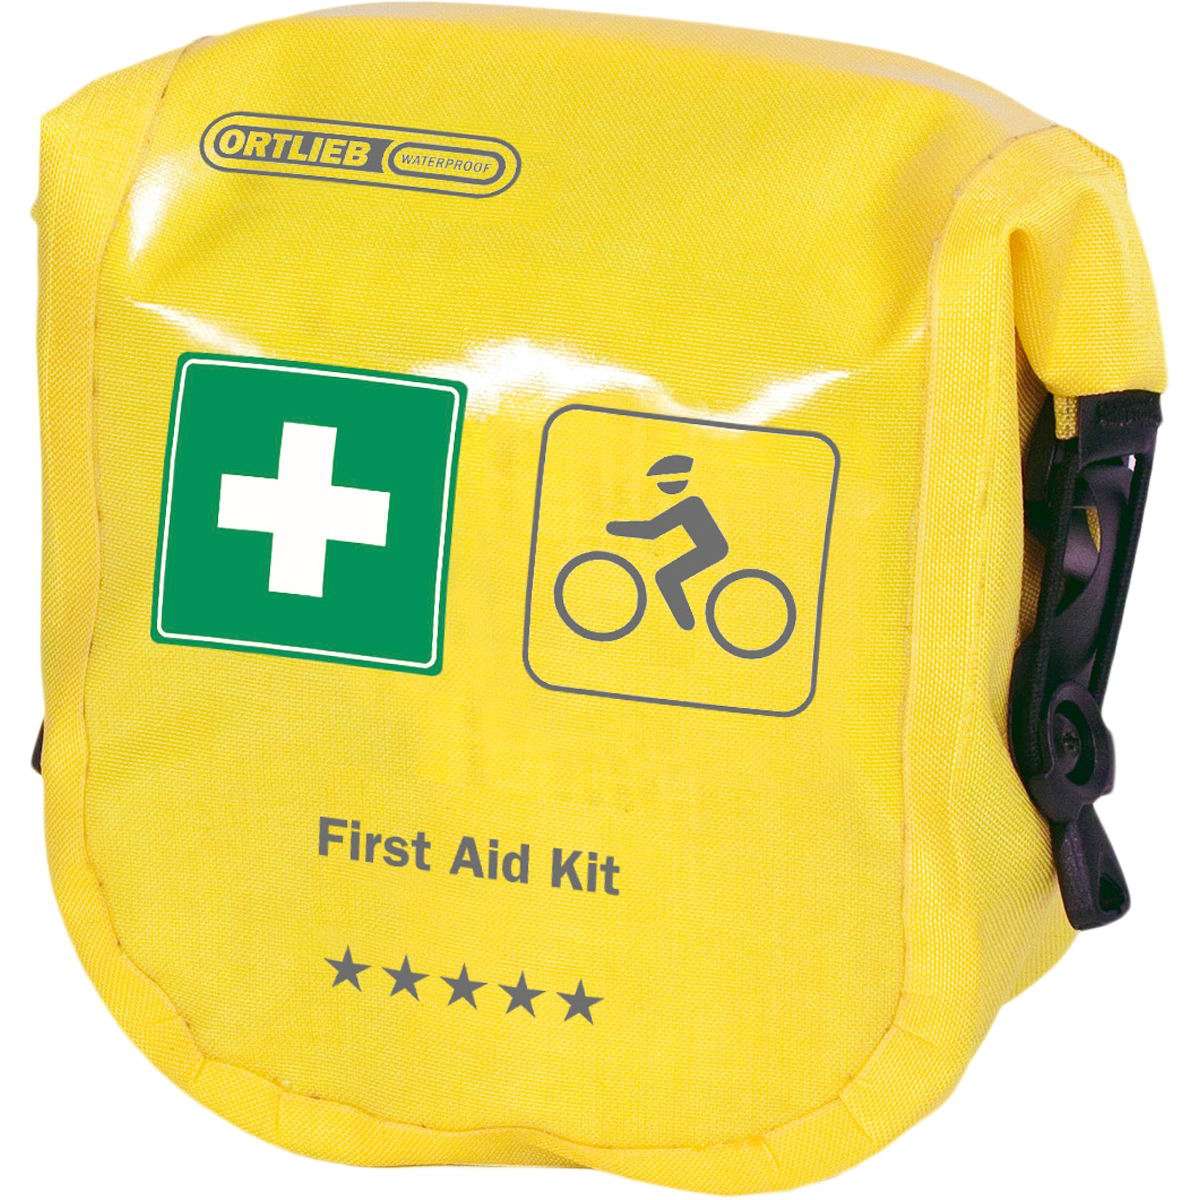 ORTLIEB First Aid Kit Safety Level High Fiets Yellow